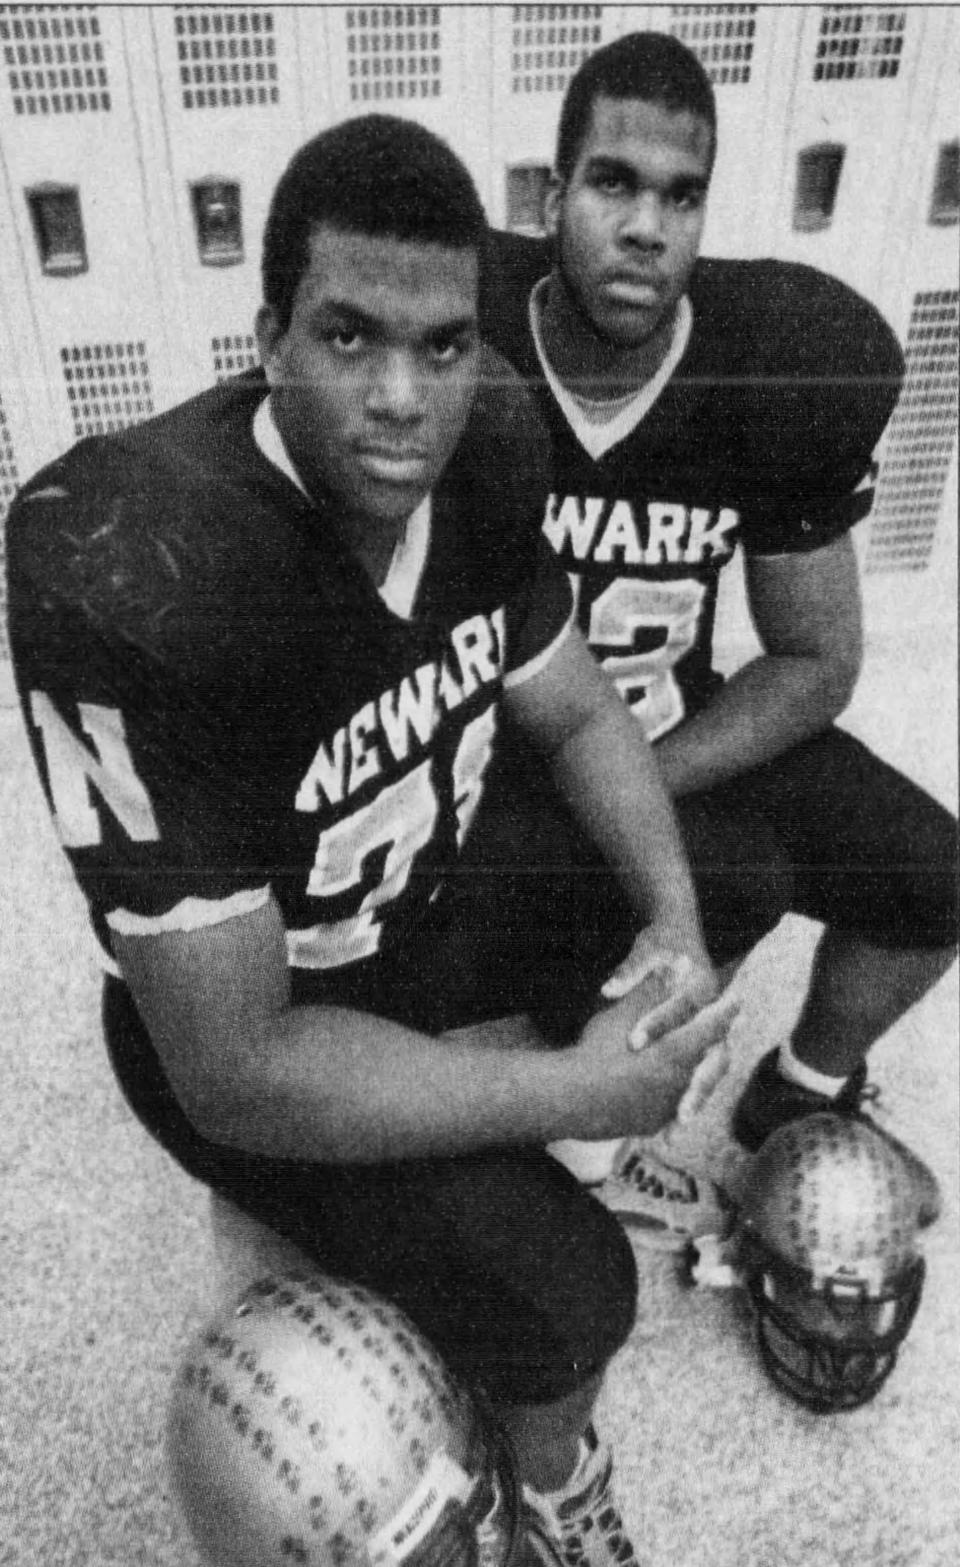 Kwame Harris, left, and brother Orien in 1999 when Kwame was a senior named Delaware's Offensive Player of the Year and Orien was a junior voted Lineman of the Year.